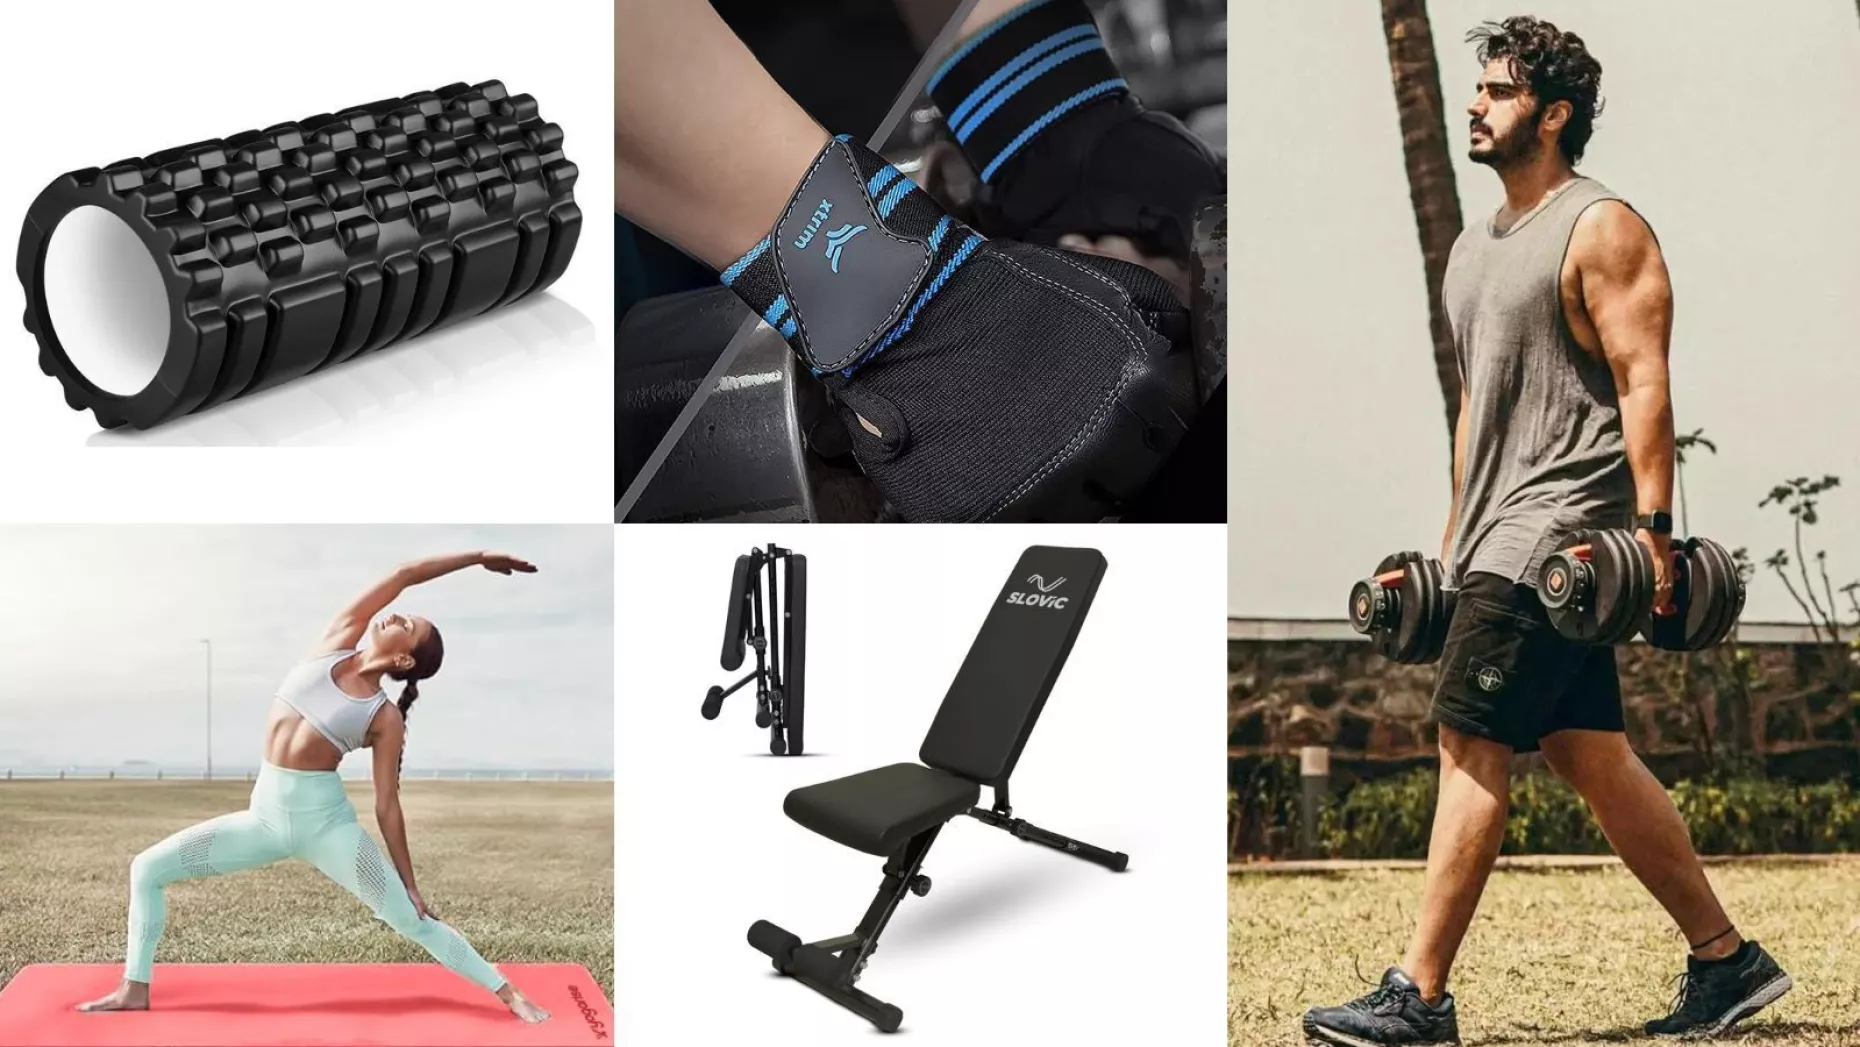 Change up your home workout routine: The best core workout equipment are available on Amazon